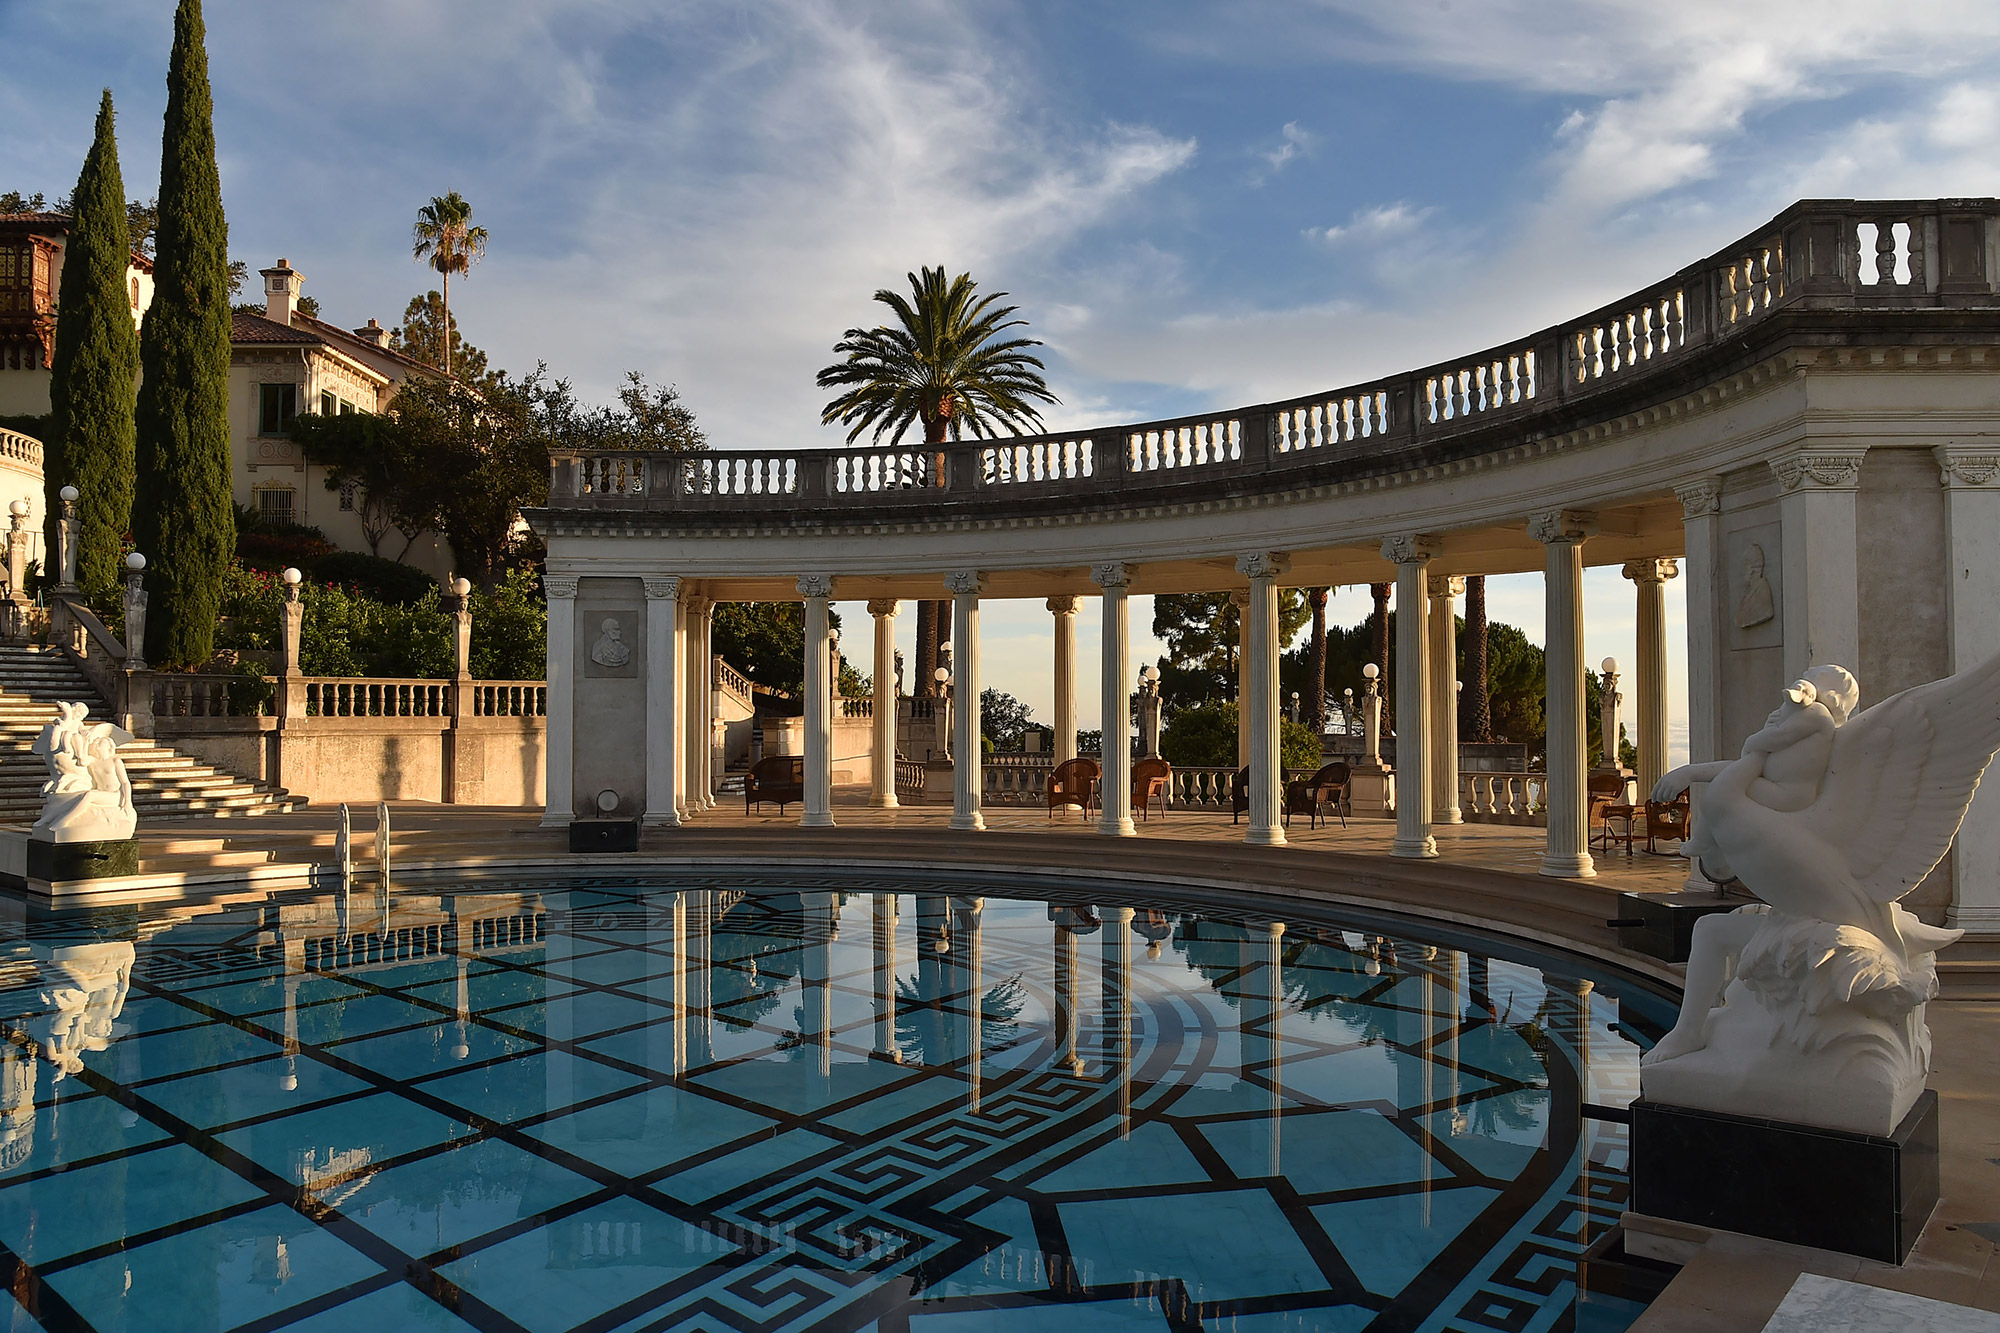 Hearst Castle Is One of the World's Greatest Places | Time.com